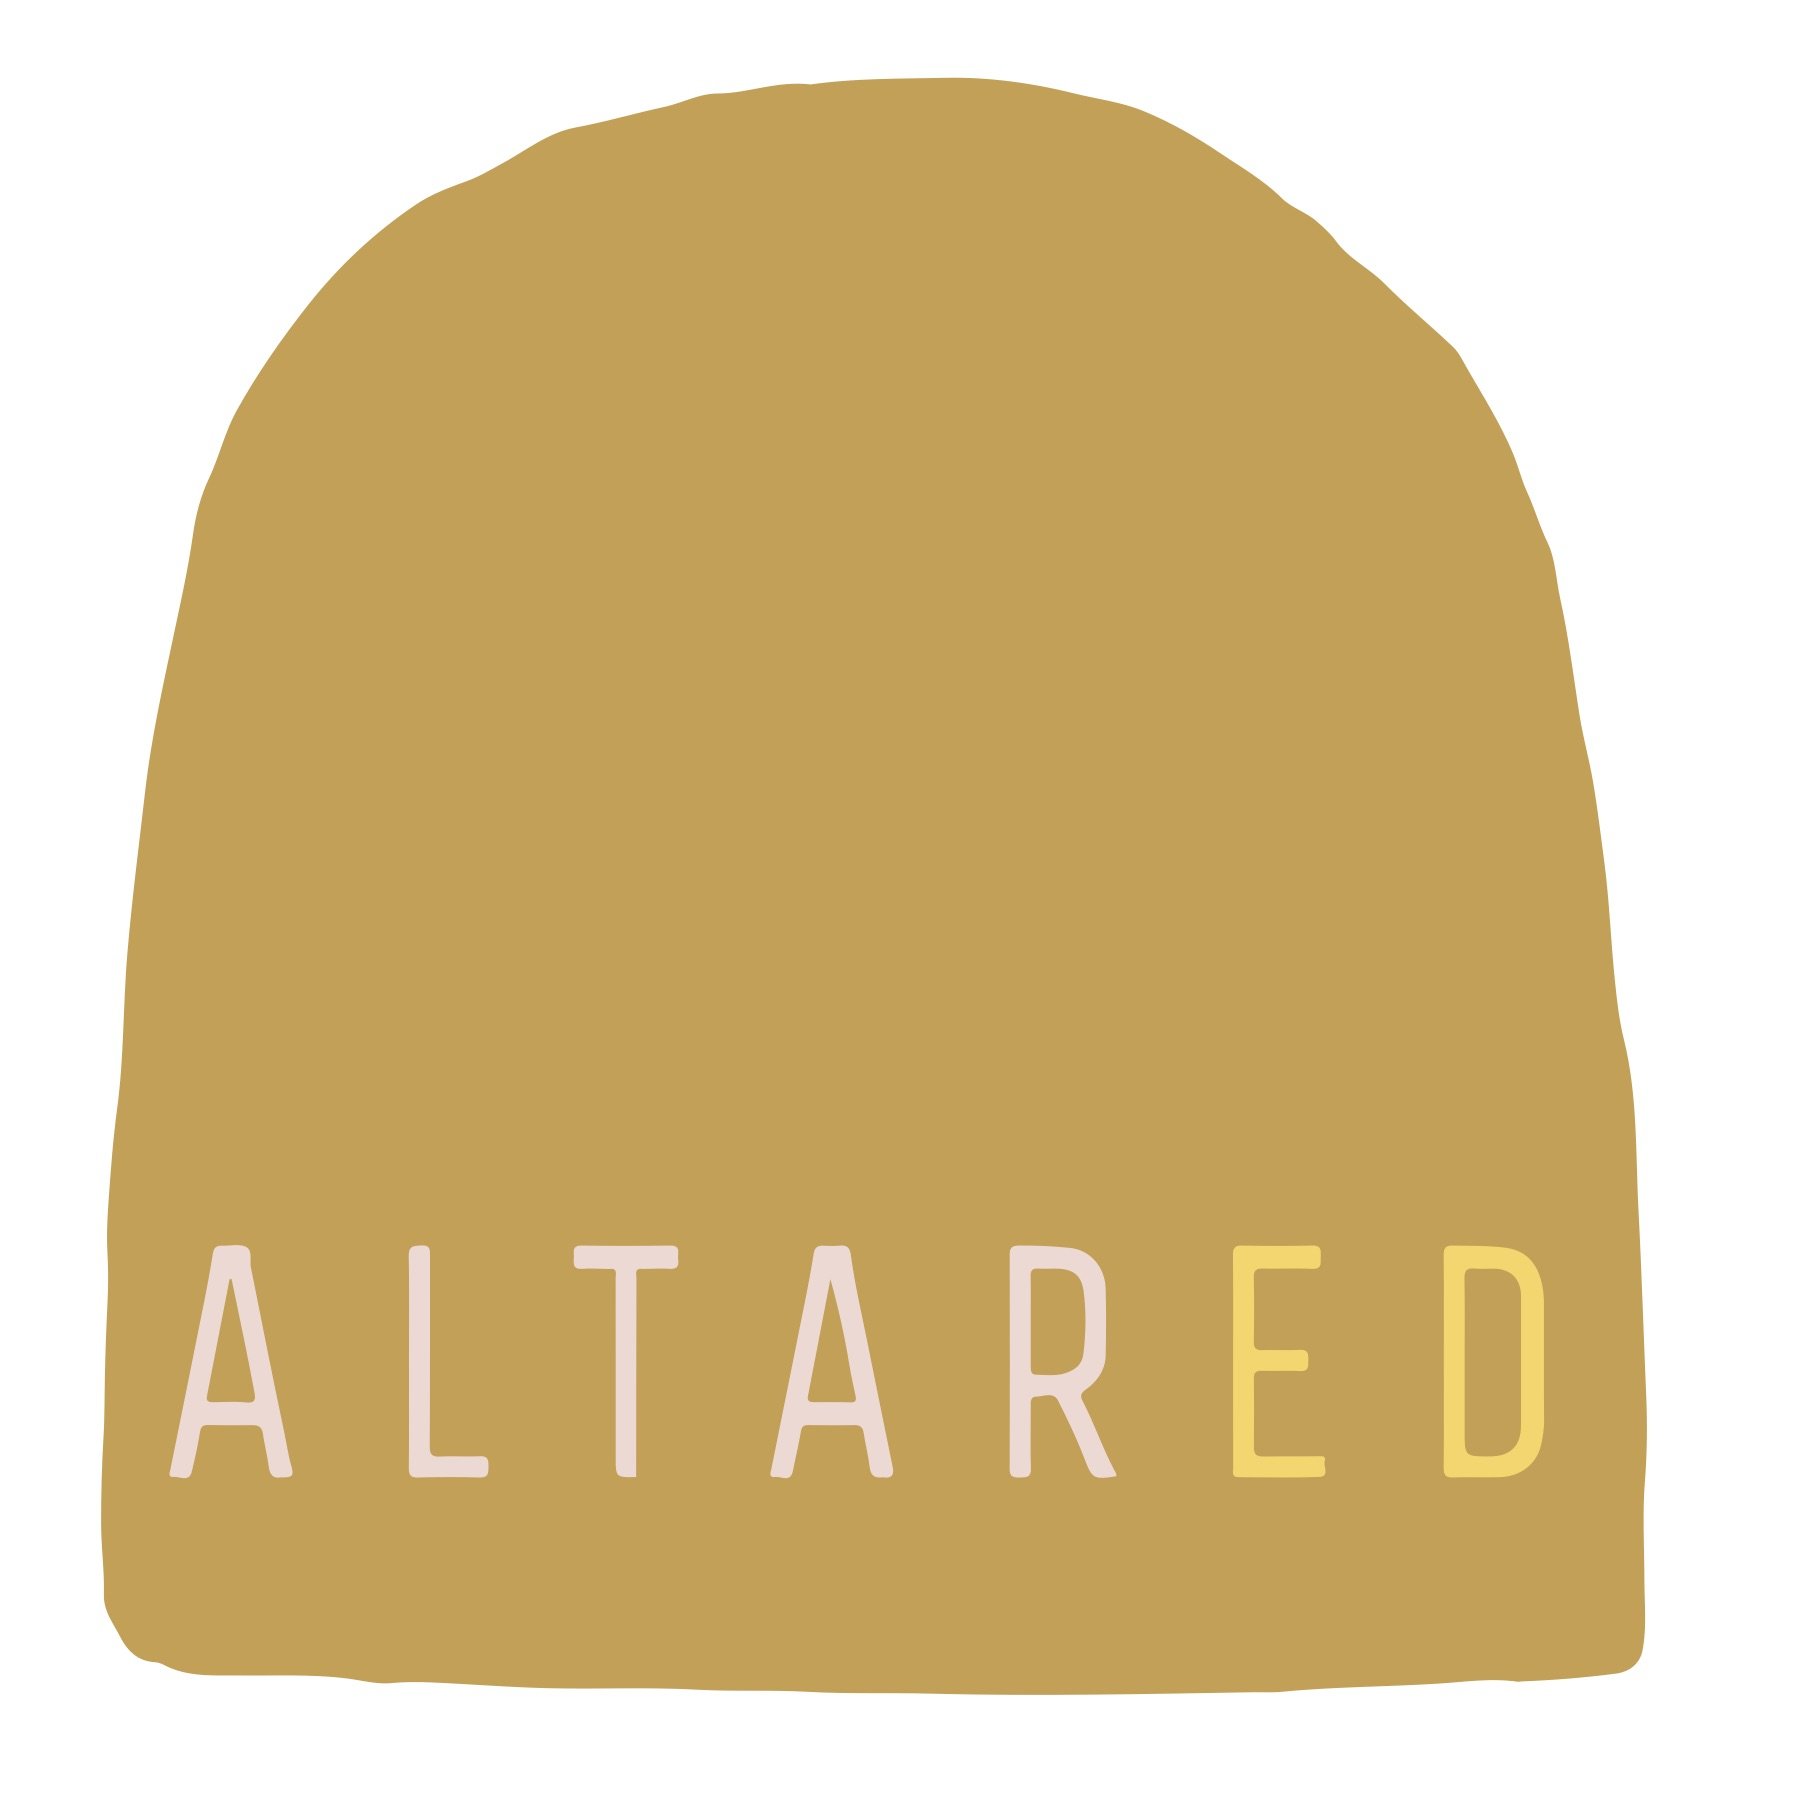 A golden arch with the word "Altared" in pink font.